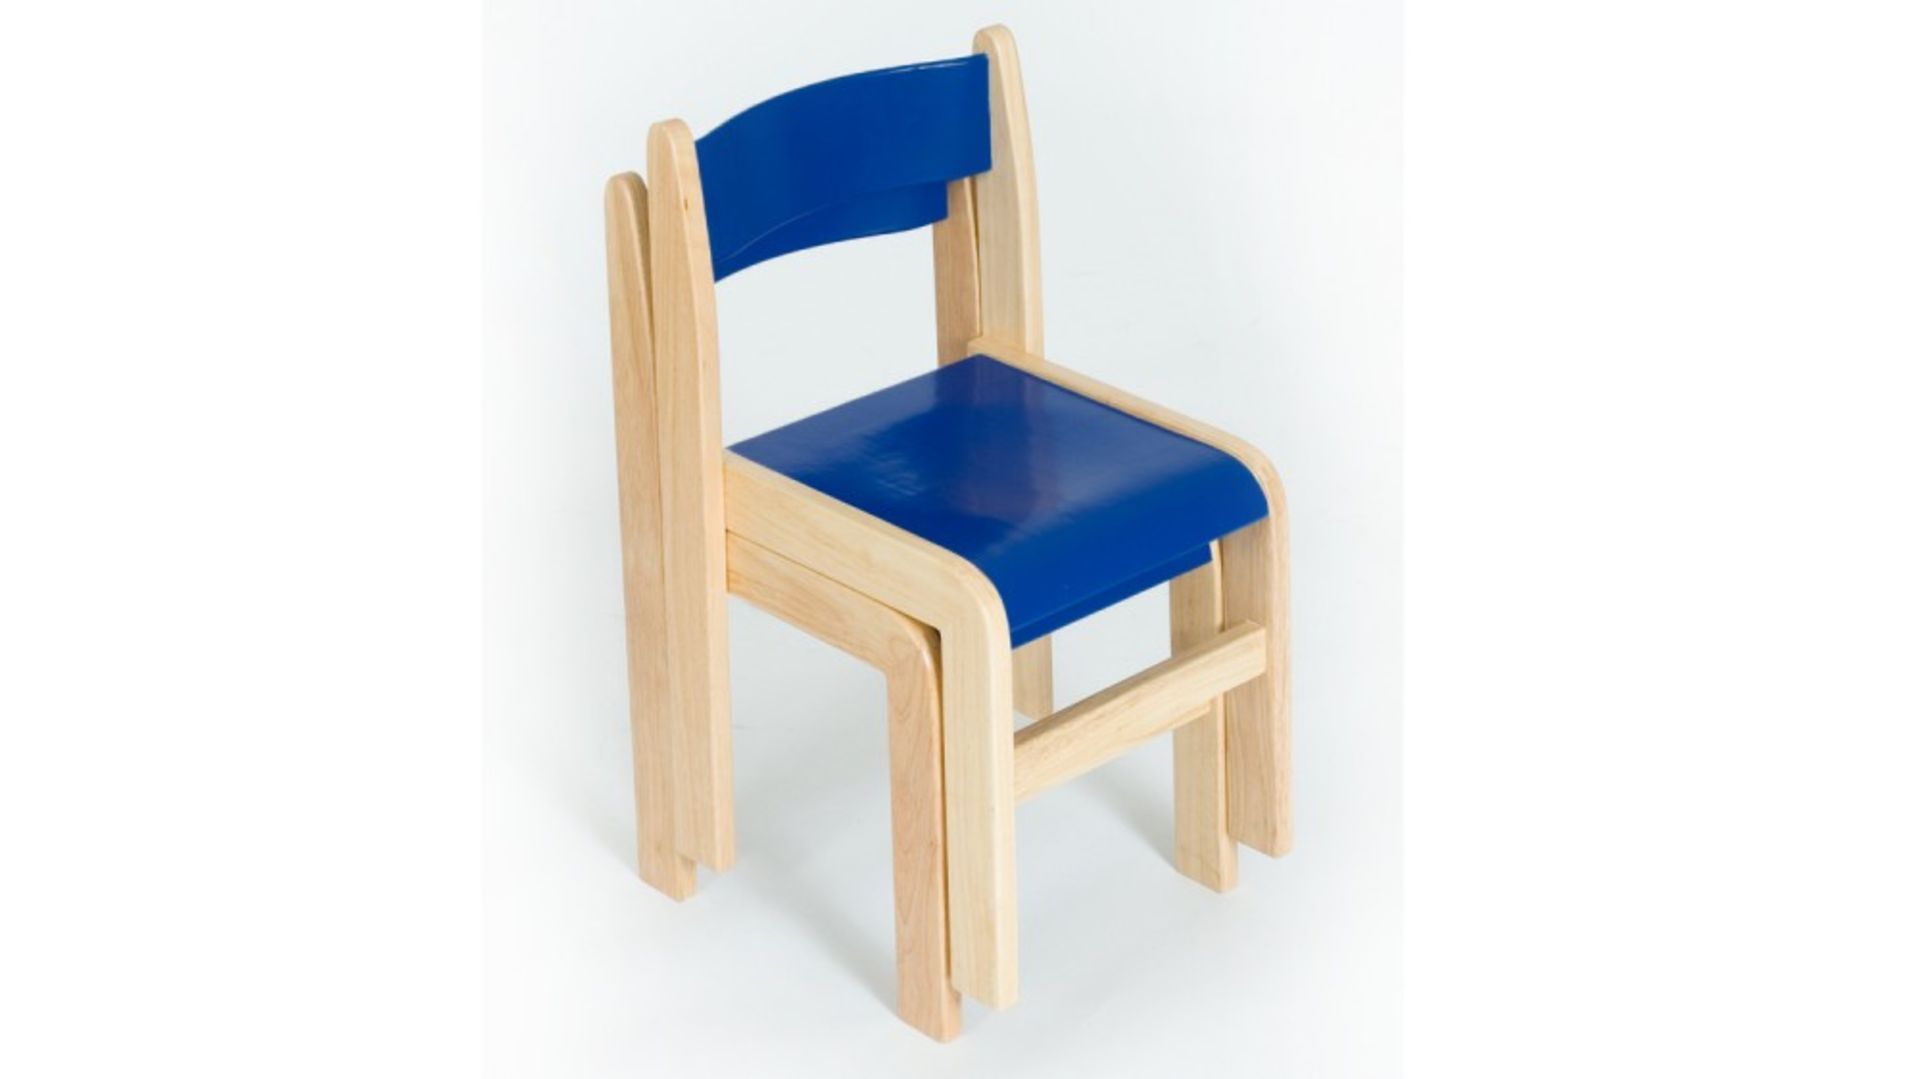 Pallet to Contain 12 x Sets of 2 Tuf Class Wooden Chair Blue. RRP £175 per set, total pallet RRP £